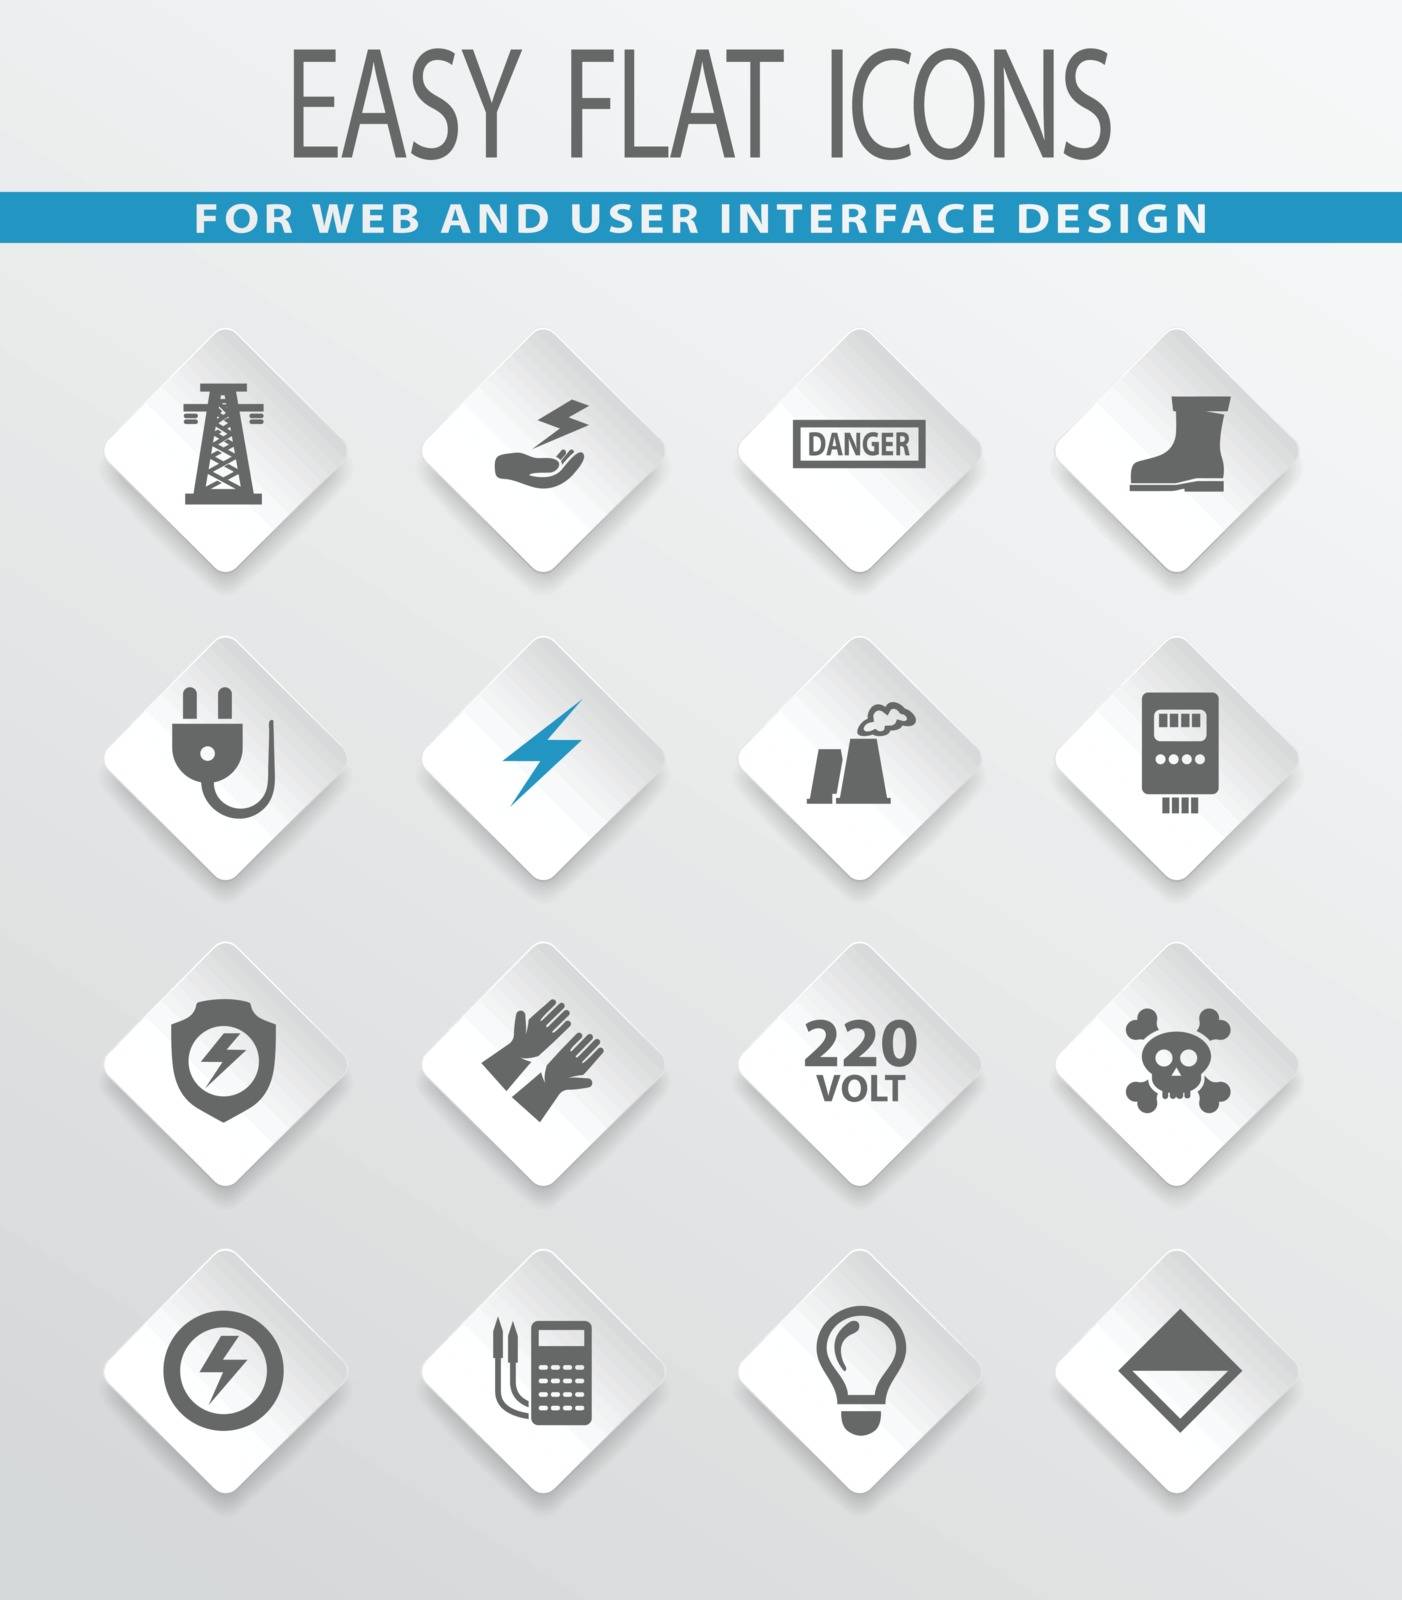 High voltage icons set by ayax